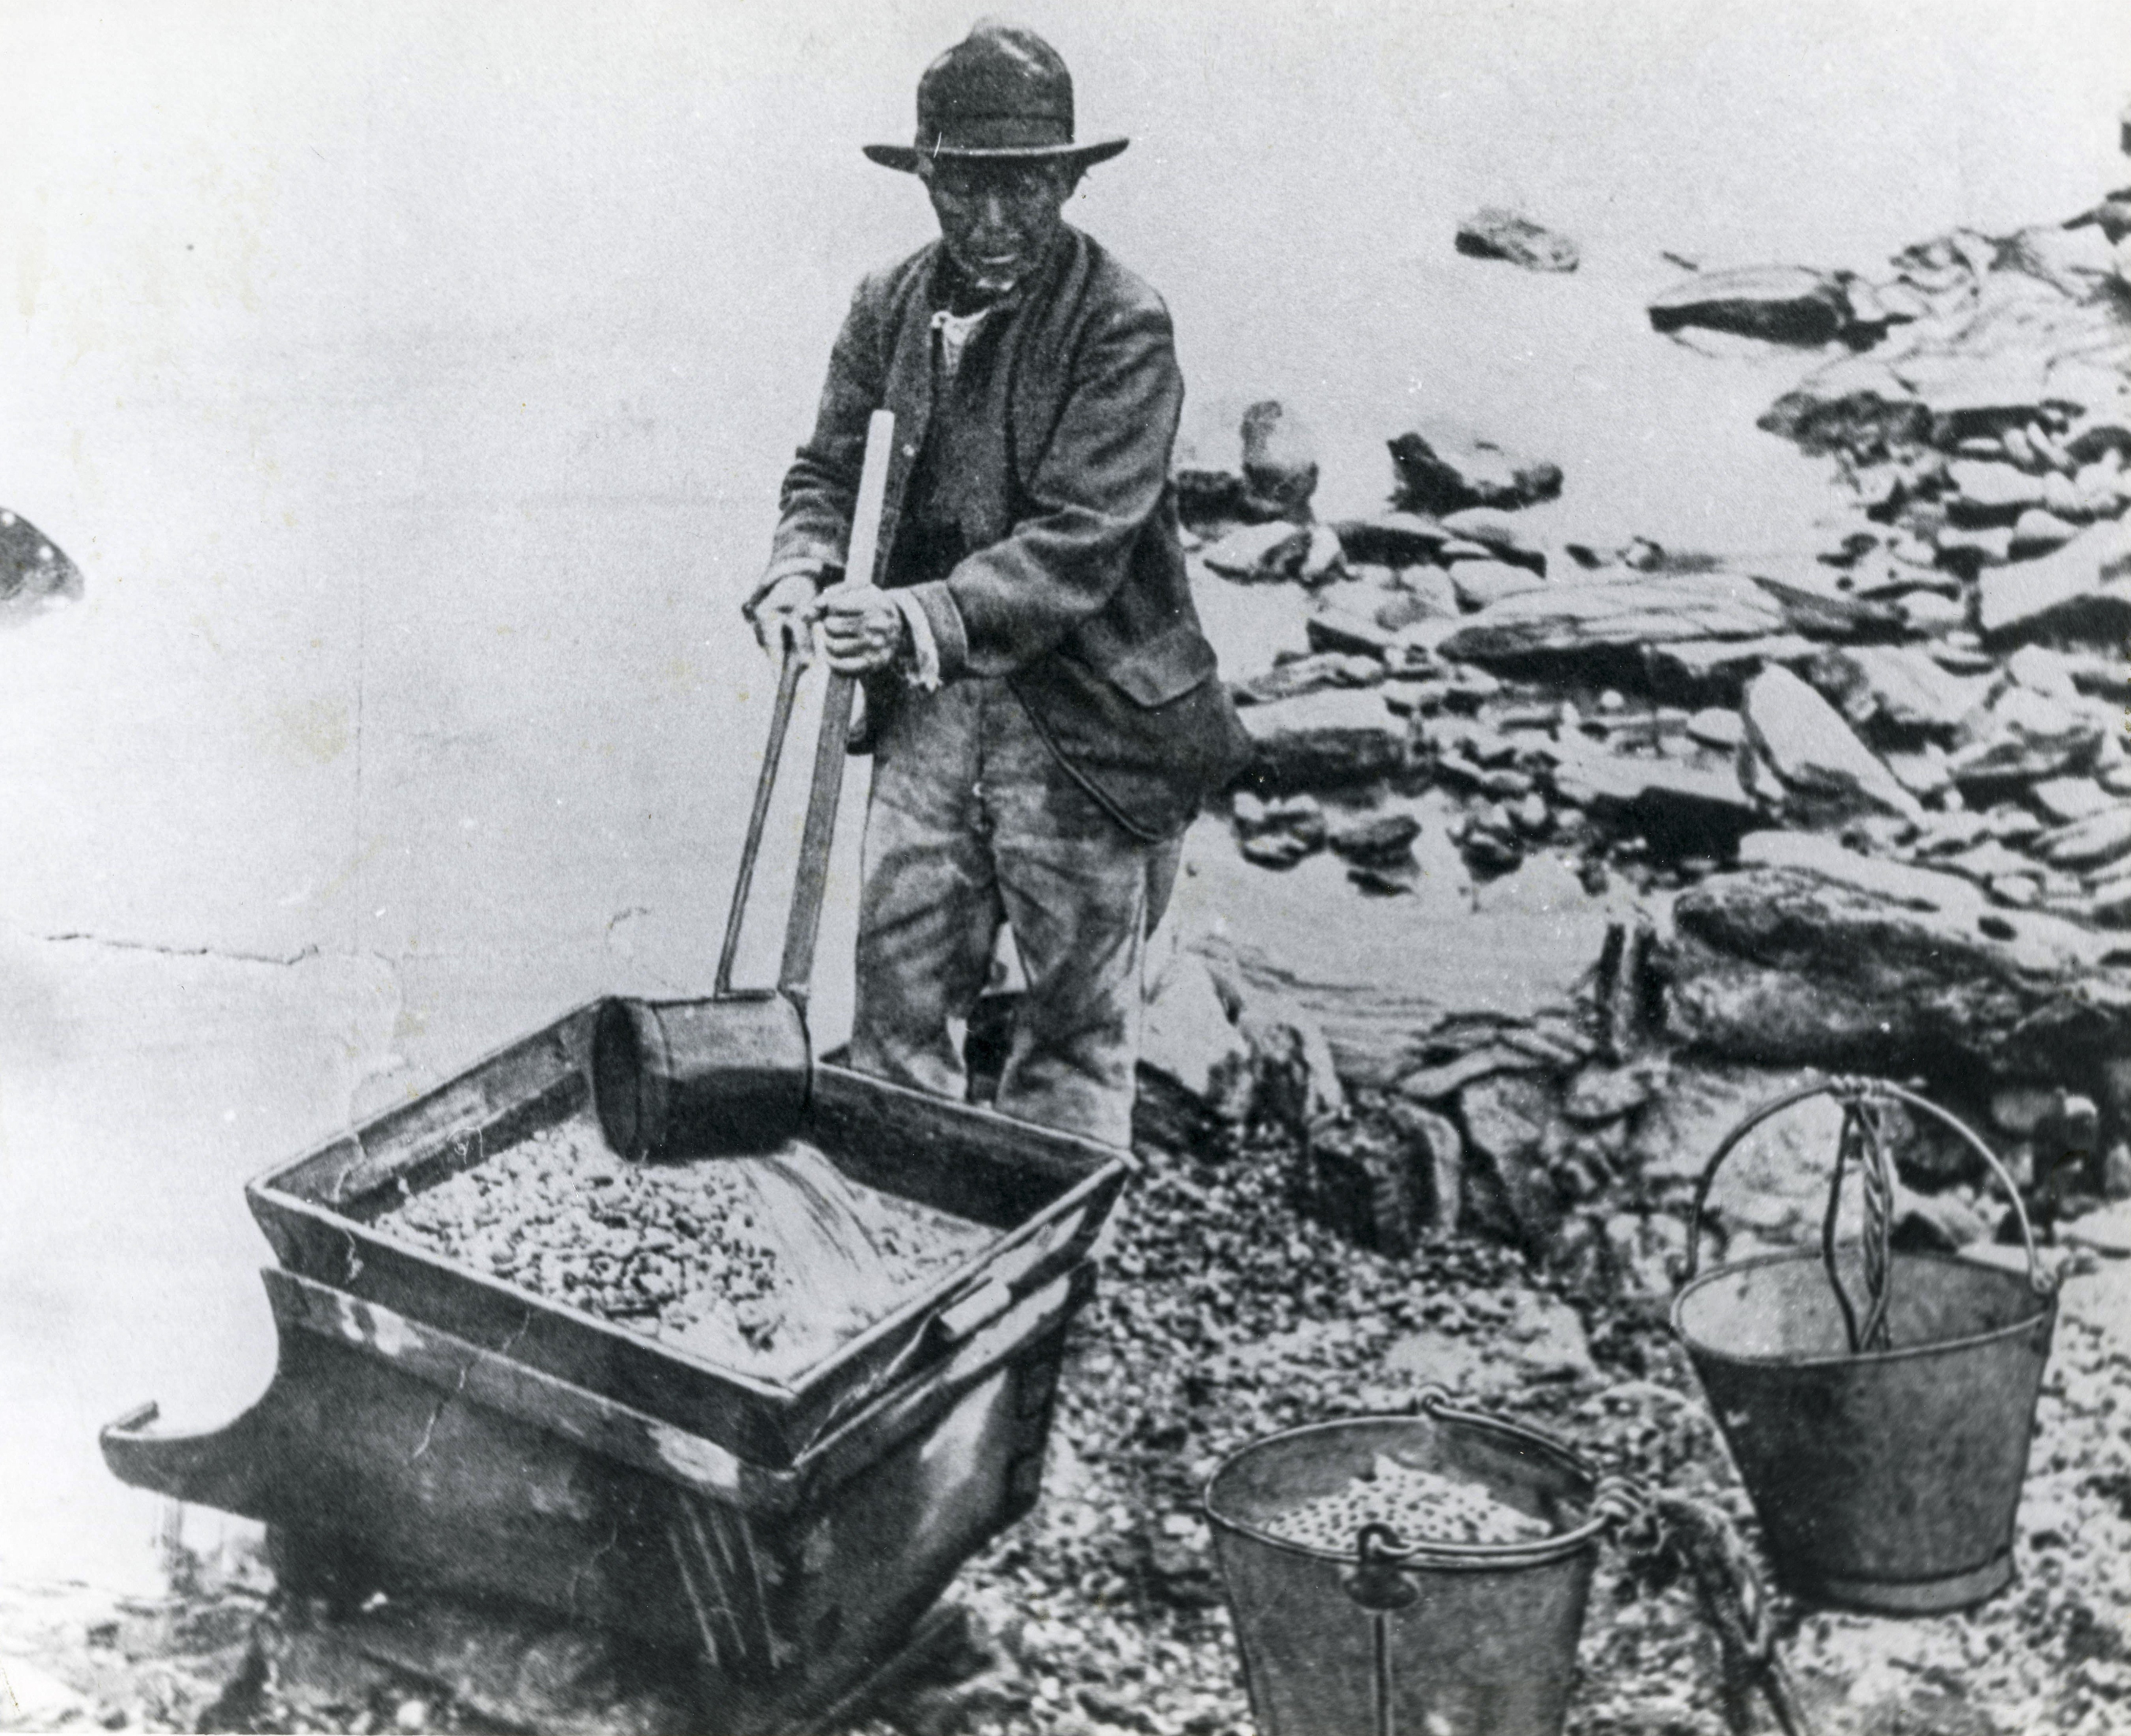 Chinese gold miners in New Zealand in the late 1800s had a reputation for recovering gold from areas Europeans had already given up on. Photo: Museum Queenstown